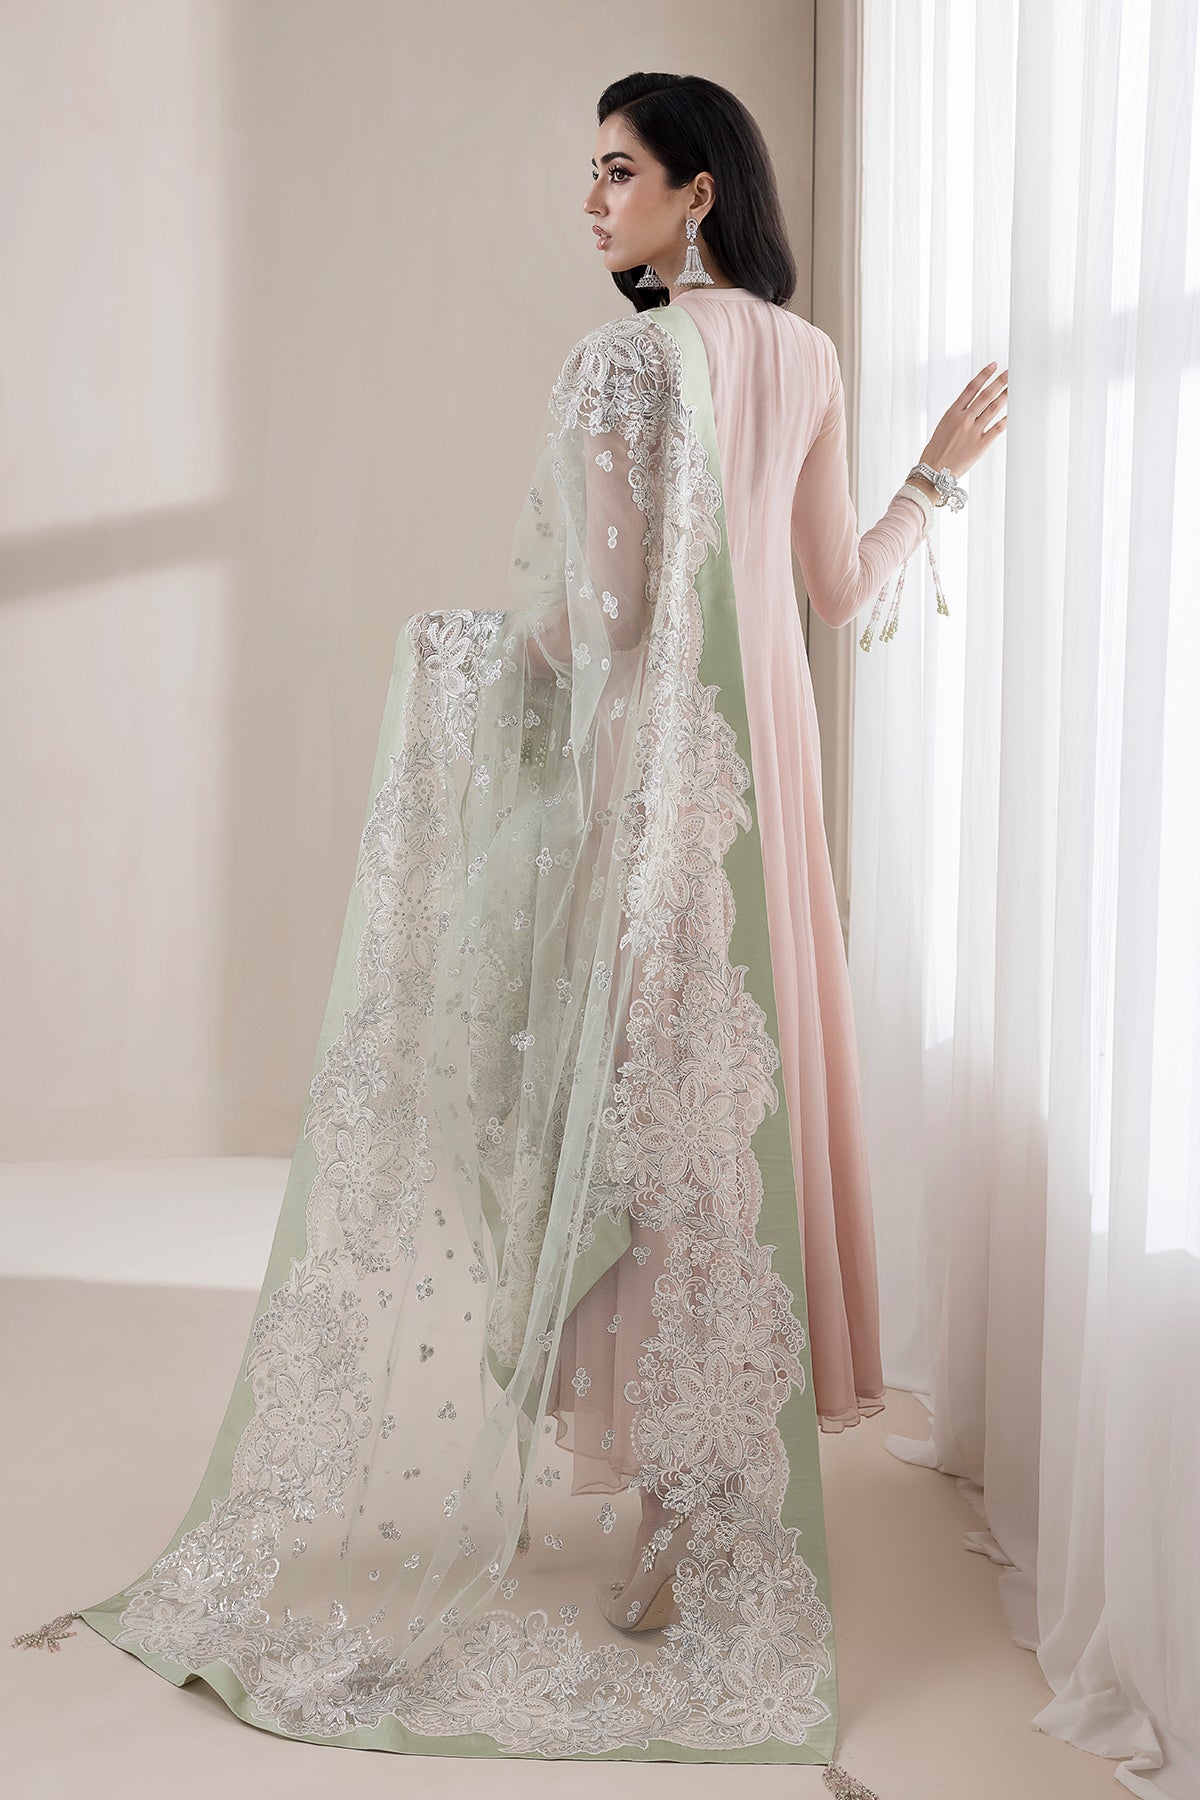 Baroque | EMBROIDERED CHIFFON FROCK | PR-844 - House of Faiza